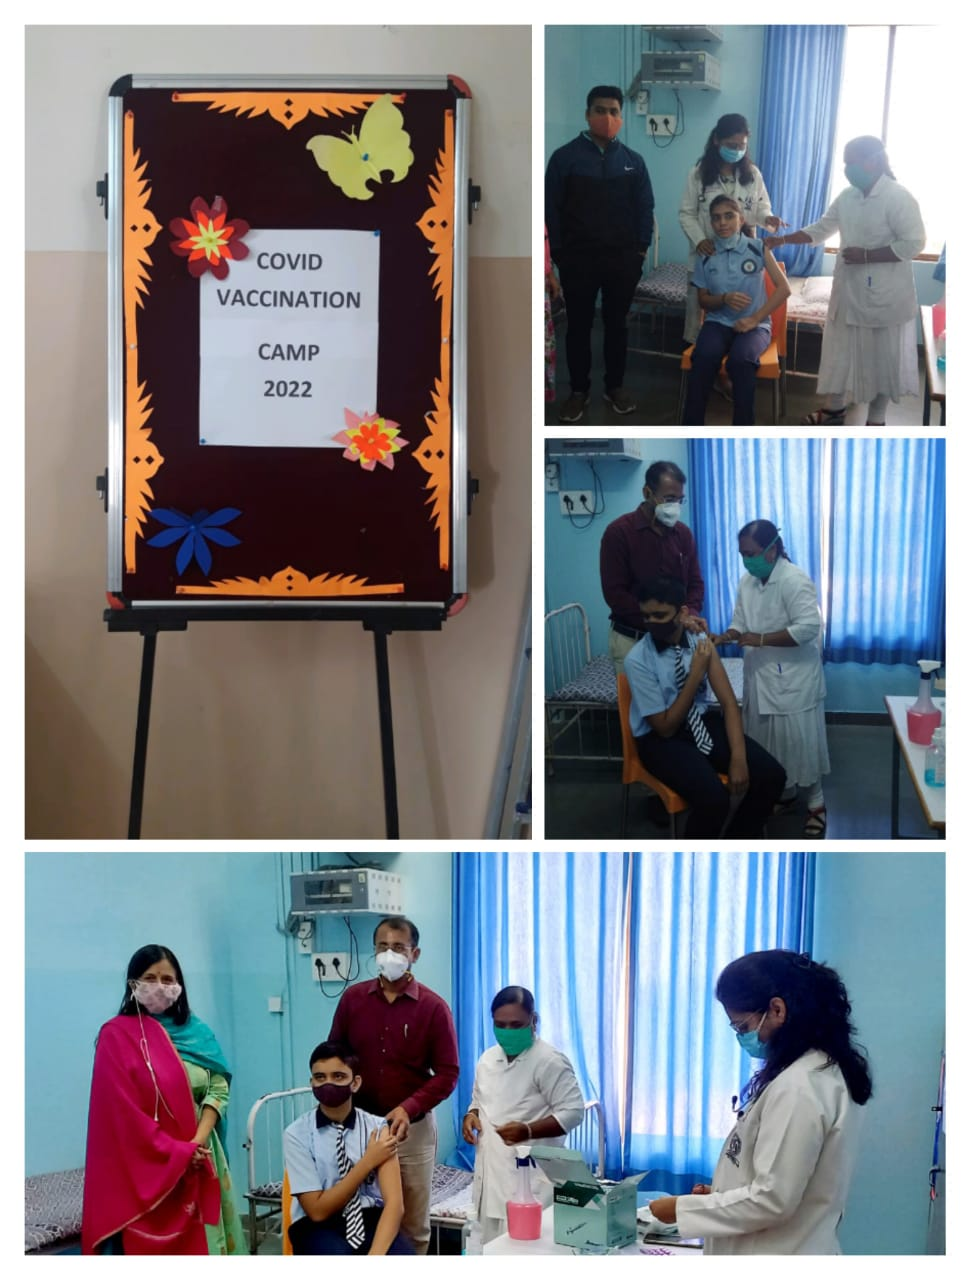  COVID Vaccination Camp at school on 10th January 2022